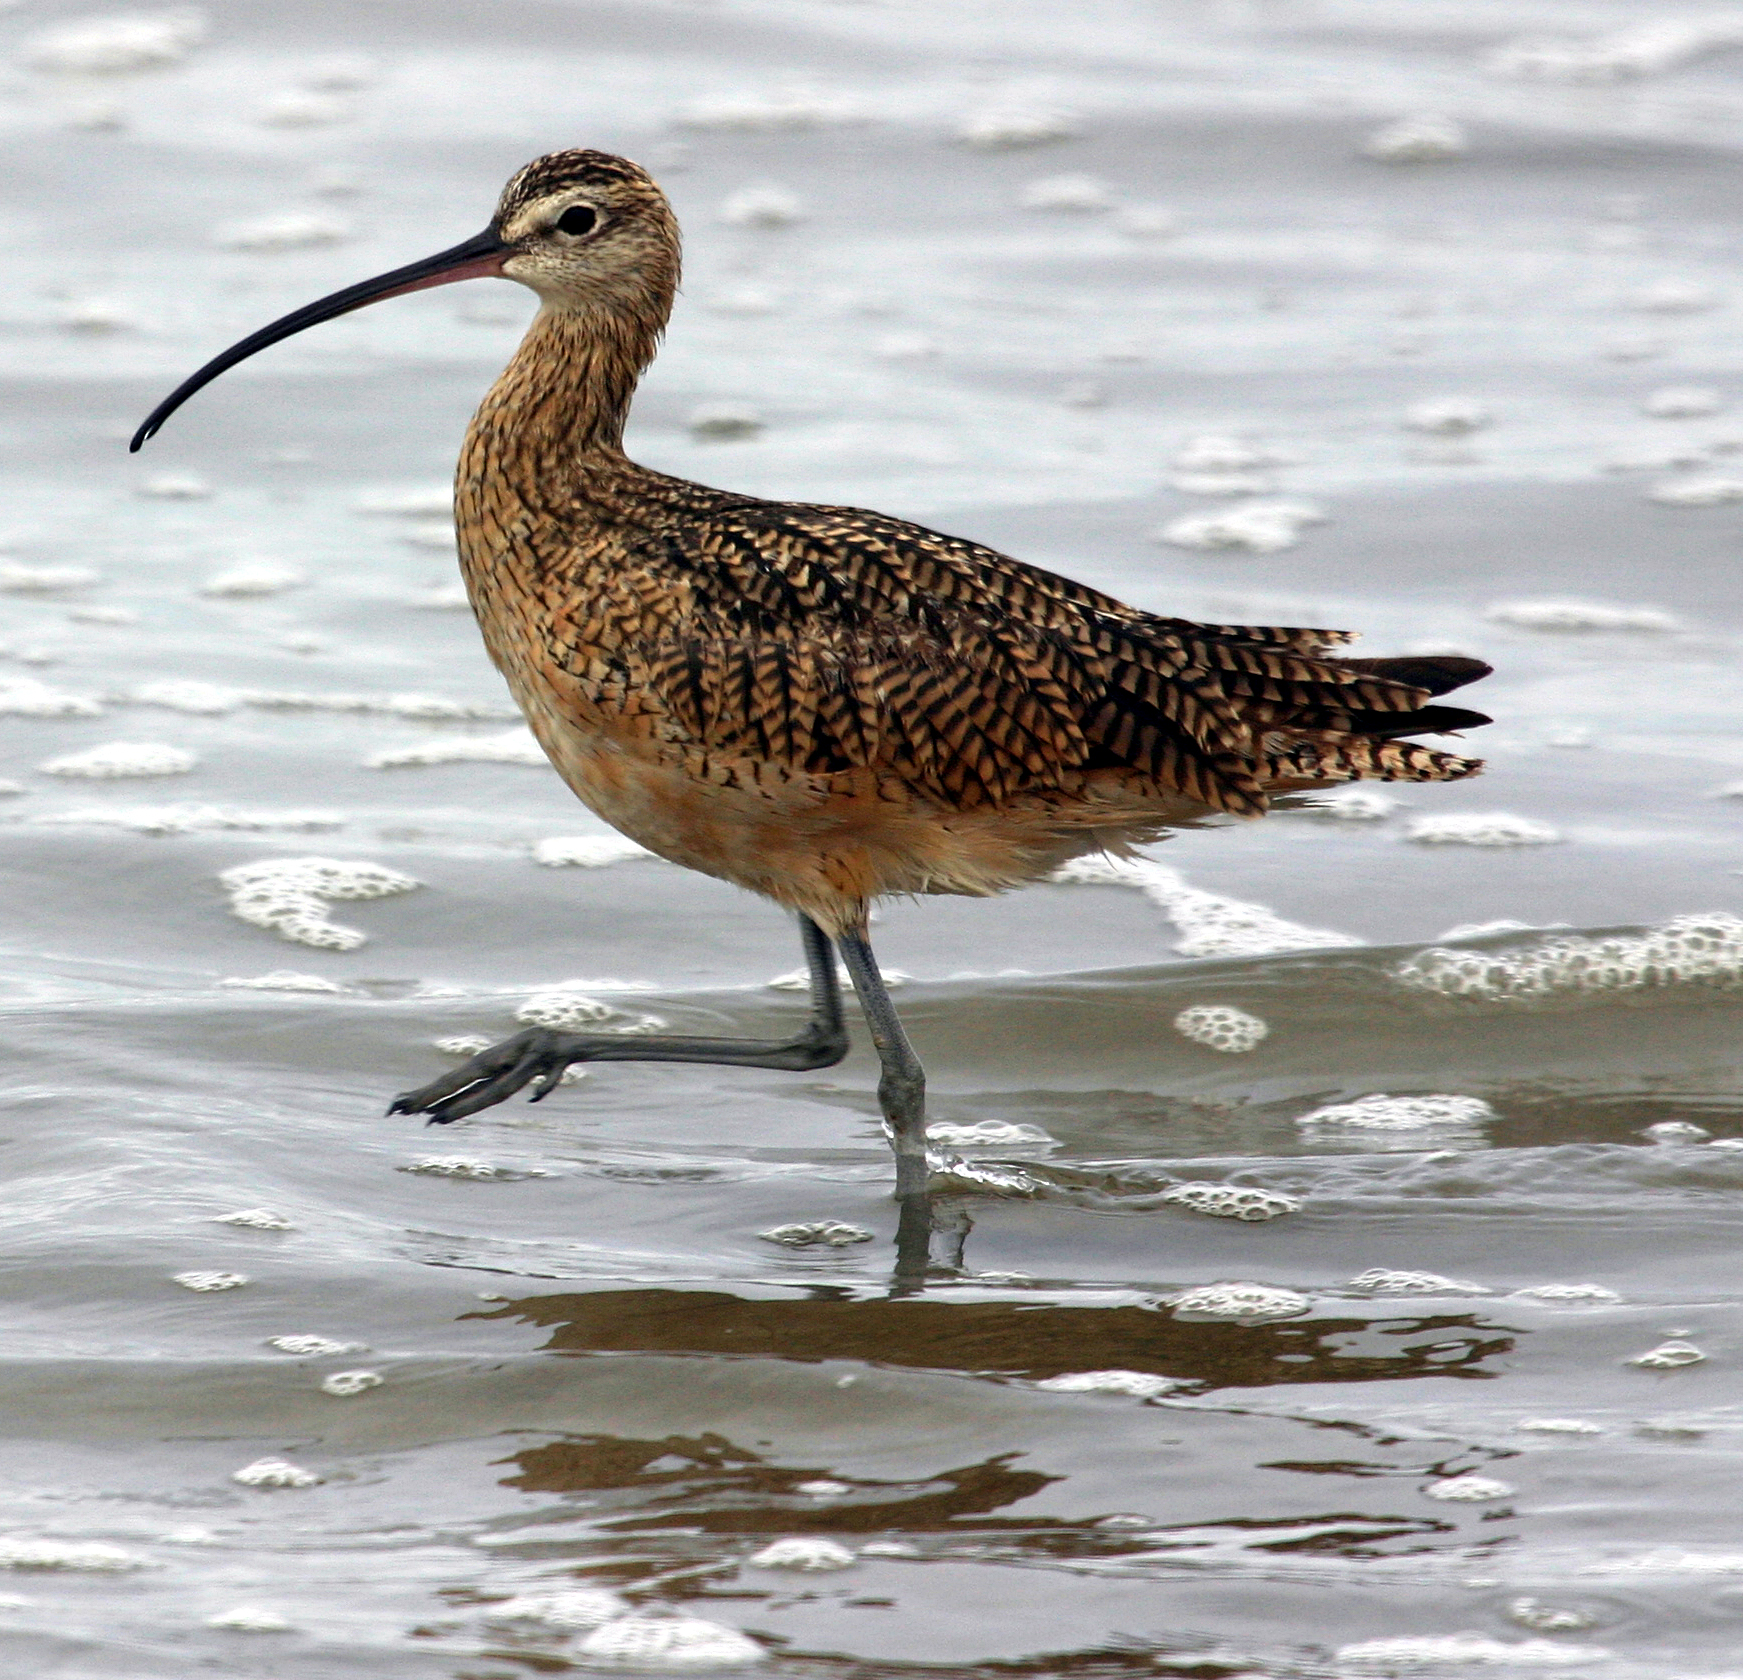 a long - billed bird standing on the beach by the water